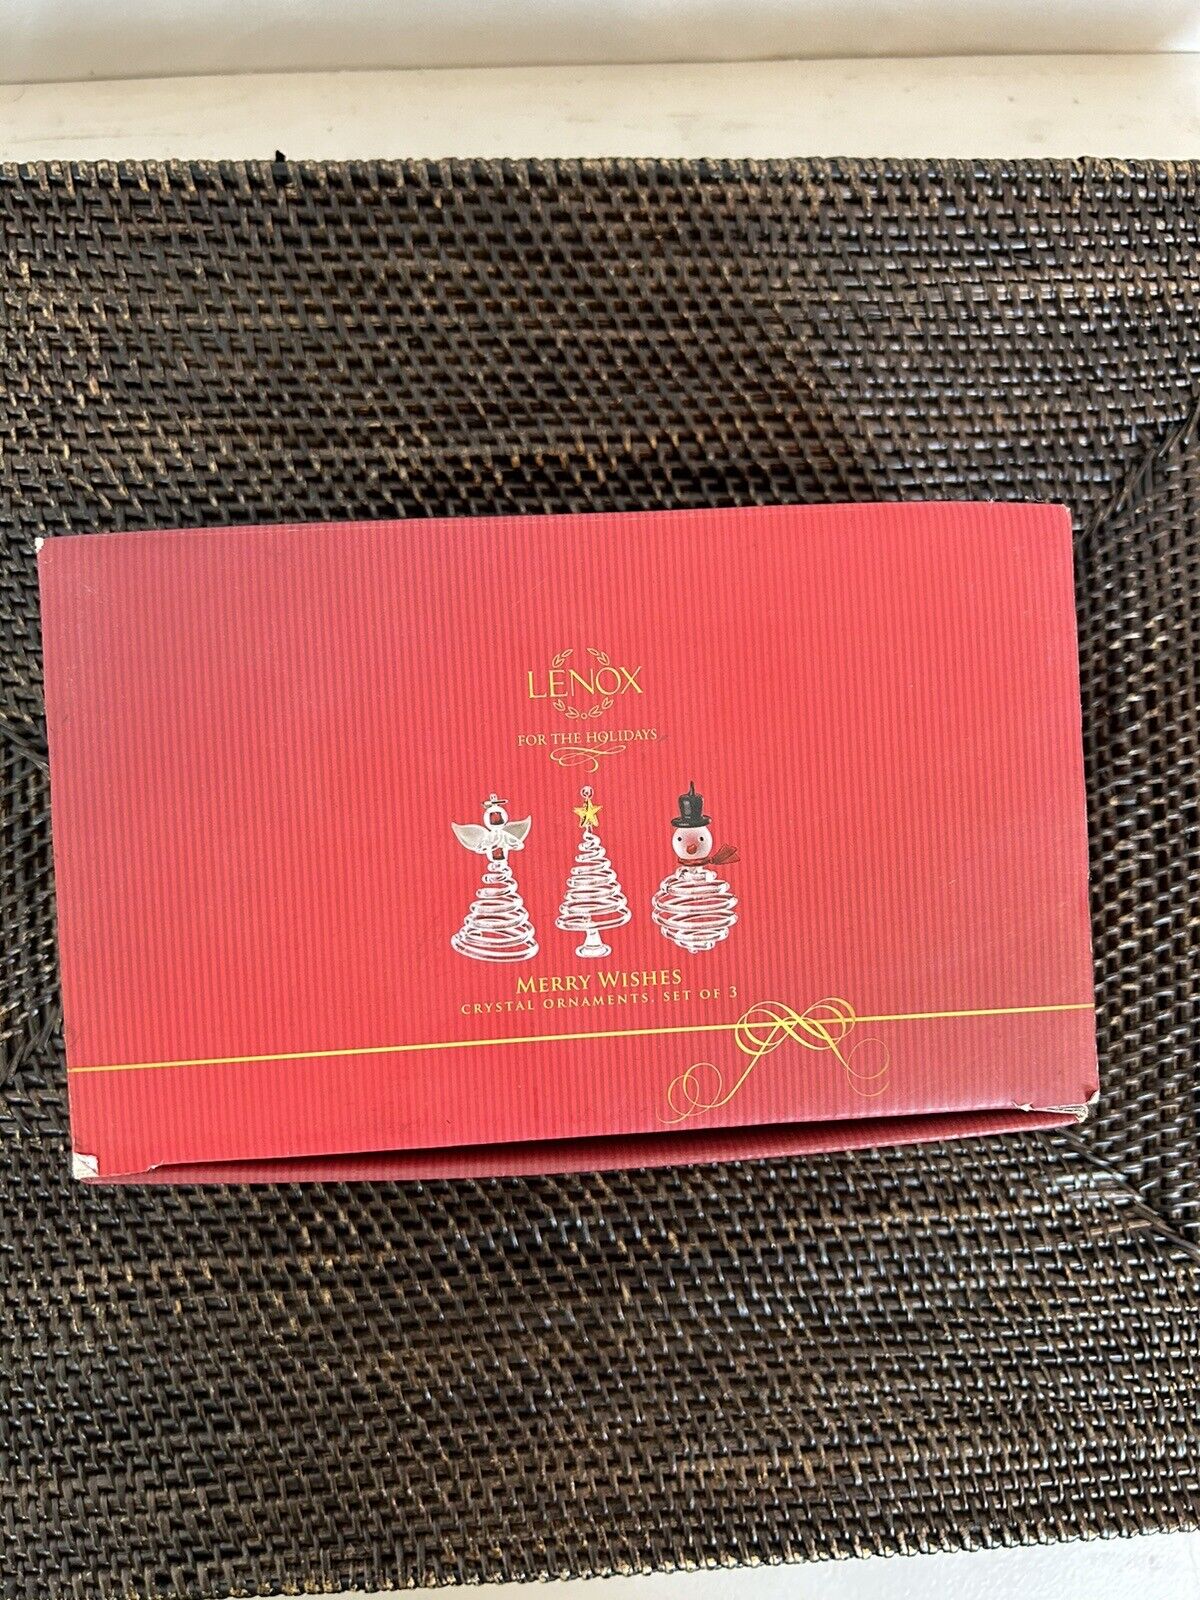 Lenox For the Holidays Merry Wishes Crystal Ornaments Set 3